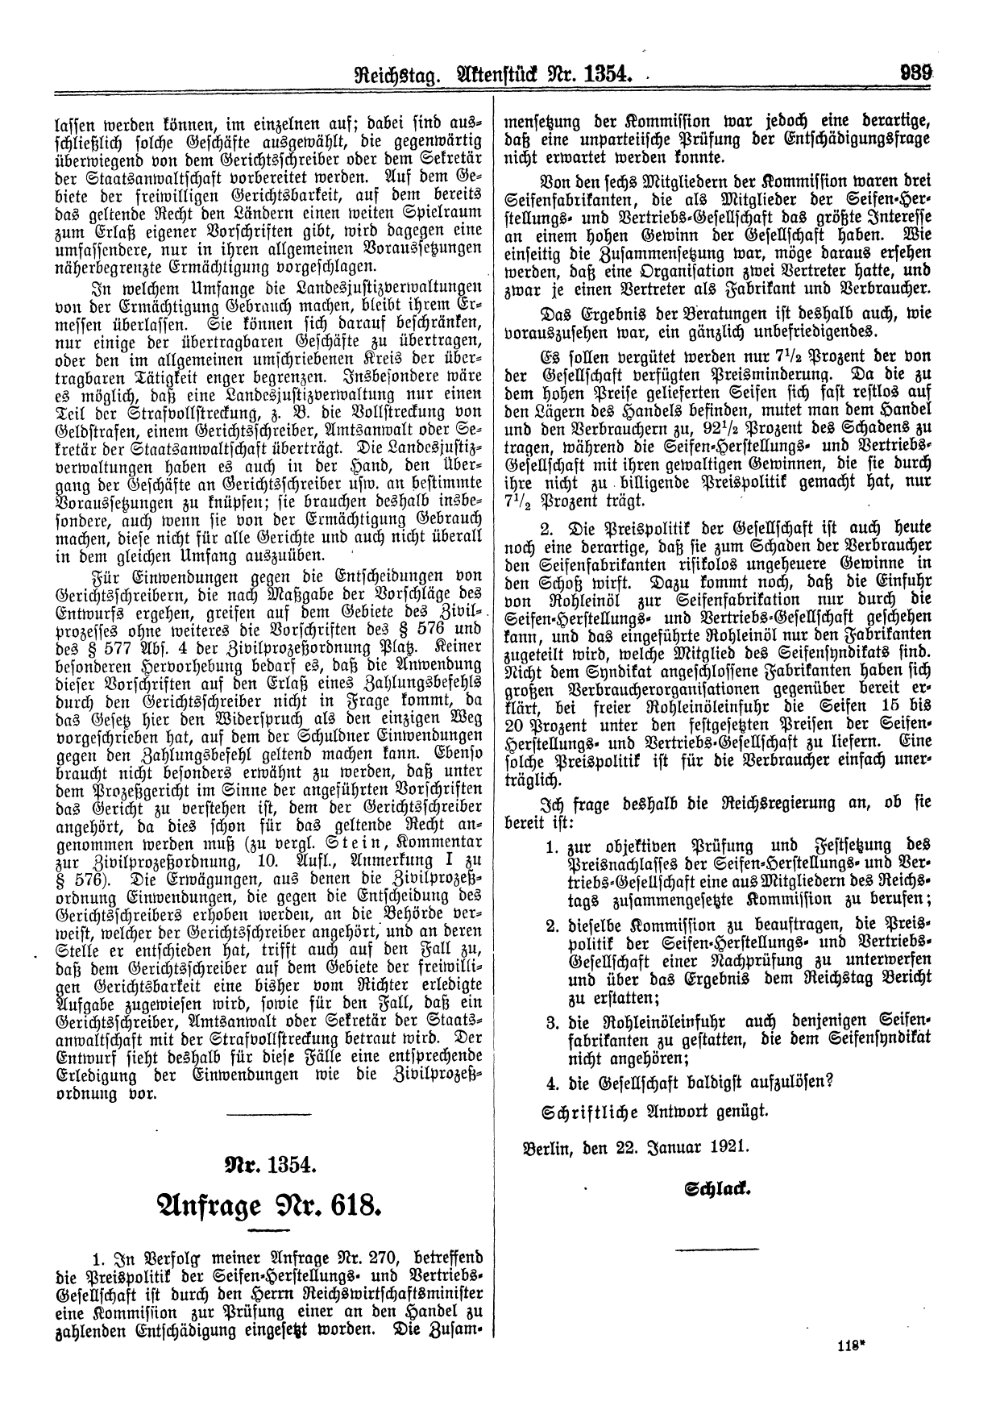 Scan of page 939